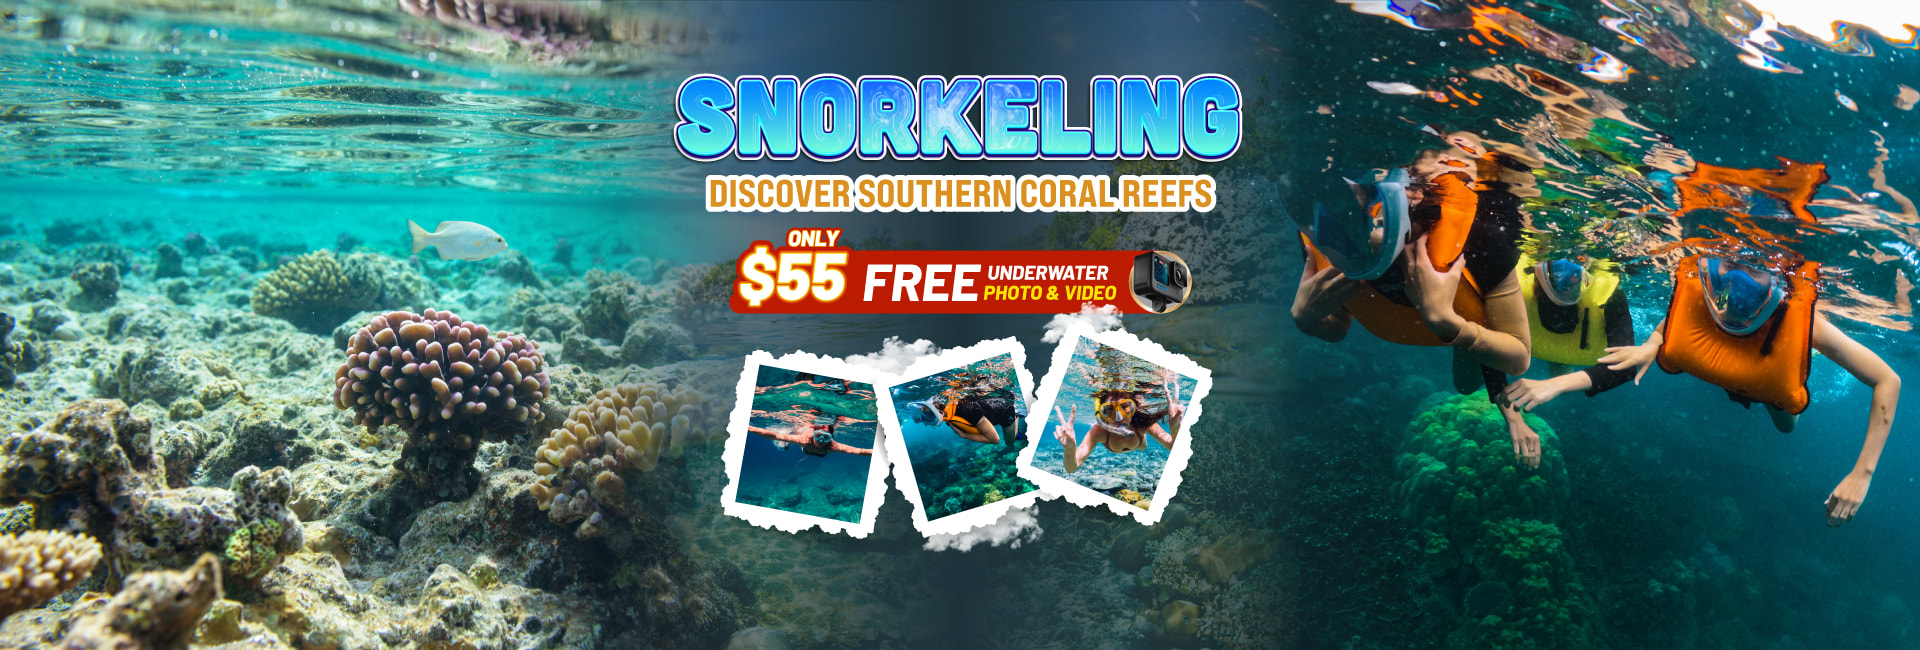 Snorkeling - Authentic coral reef snorkeling tour in Phu Quoc.